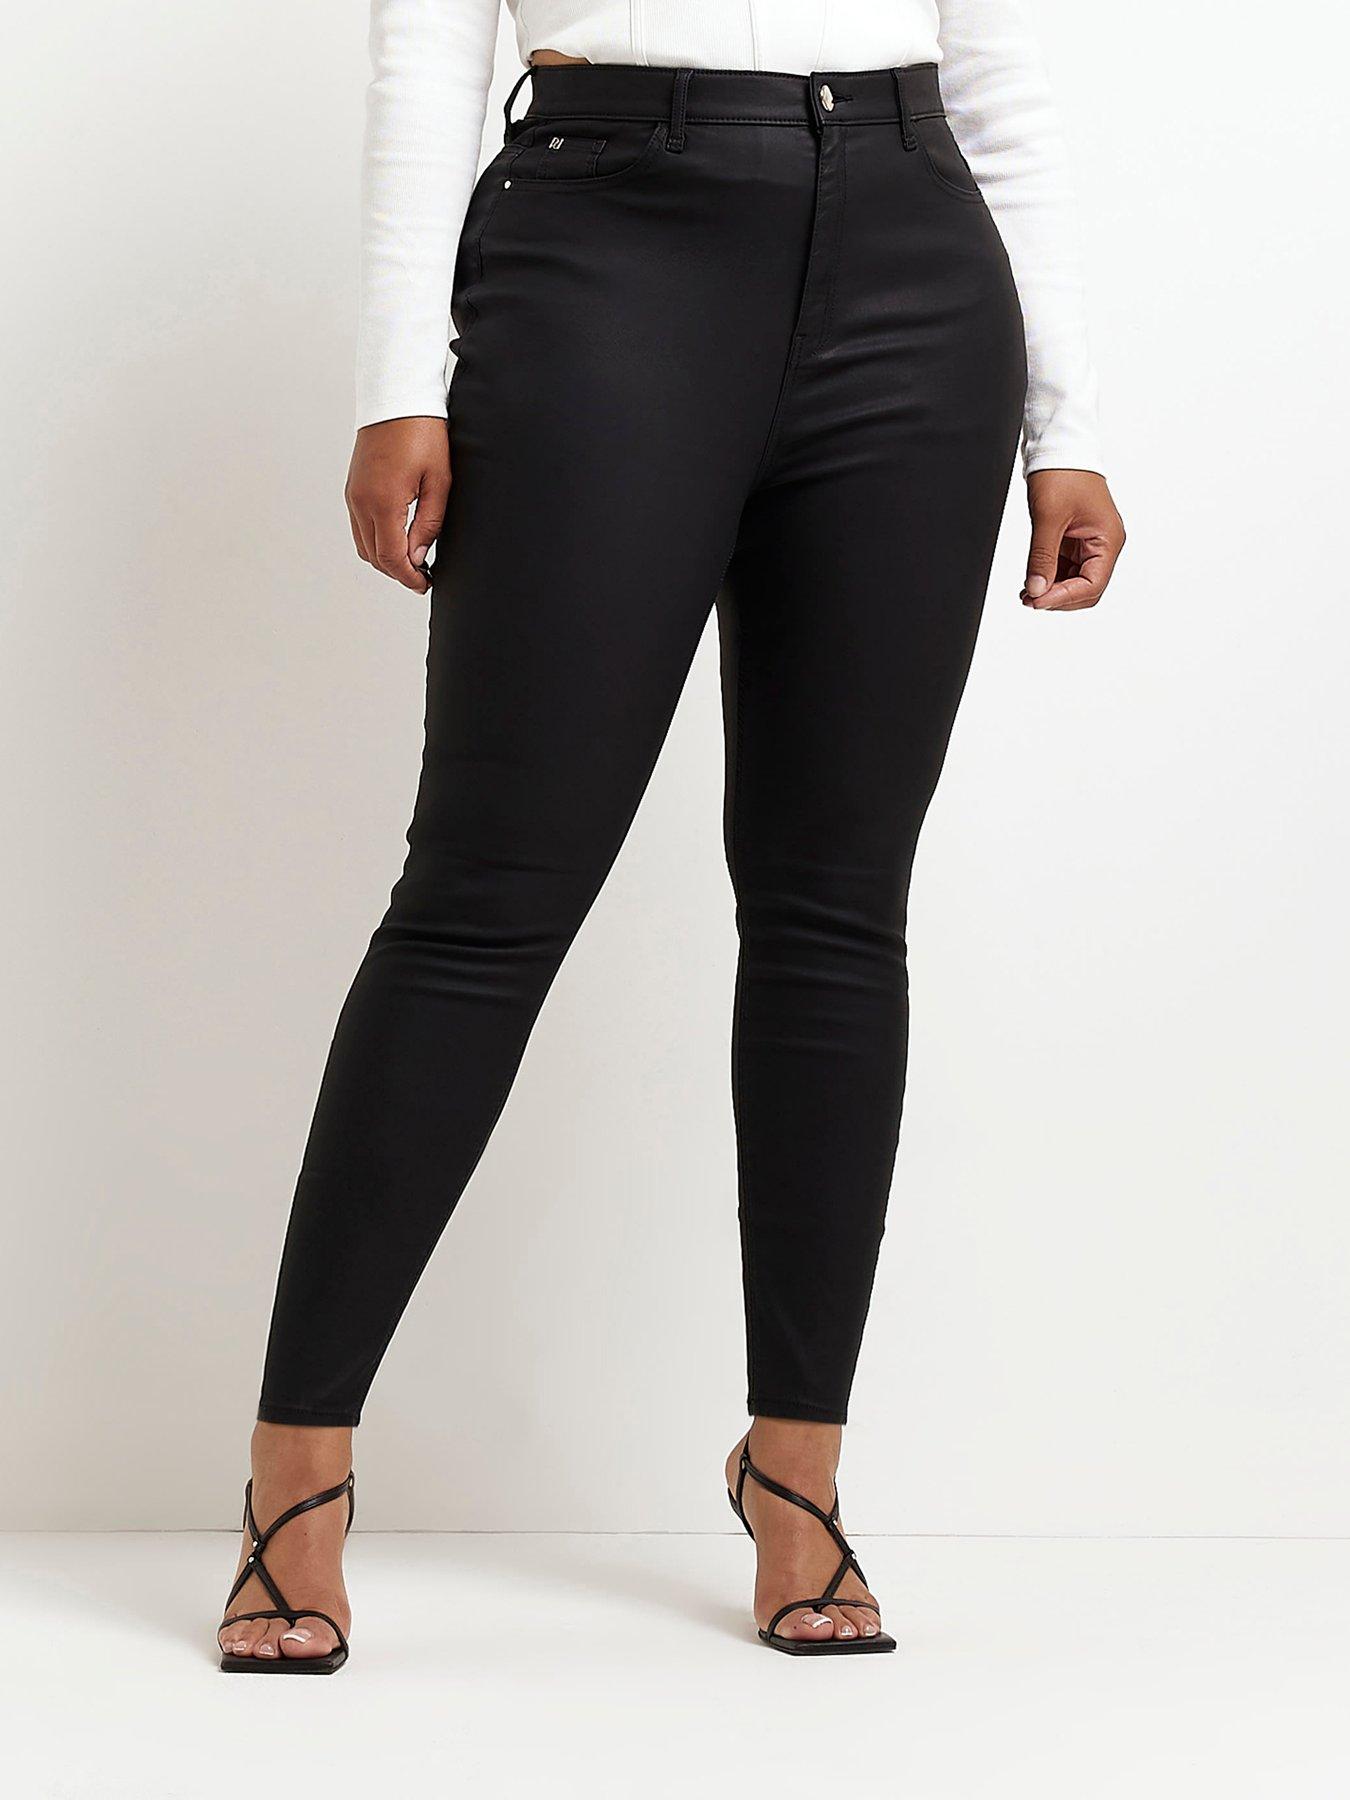 Daily Driver Black Coated High Rise Skinny Jeans